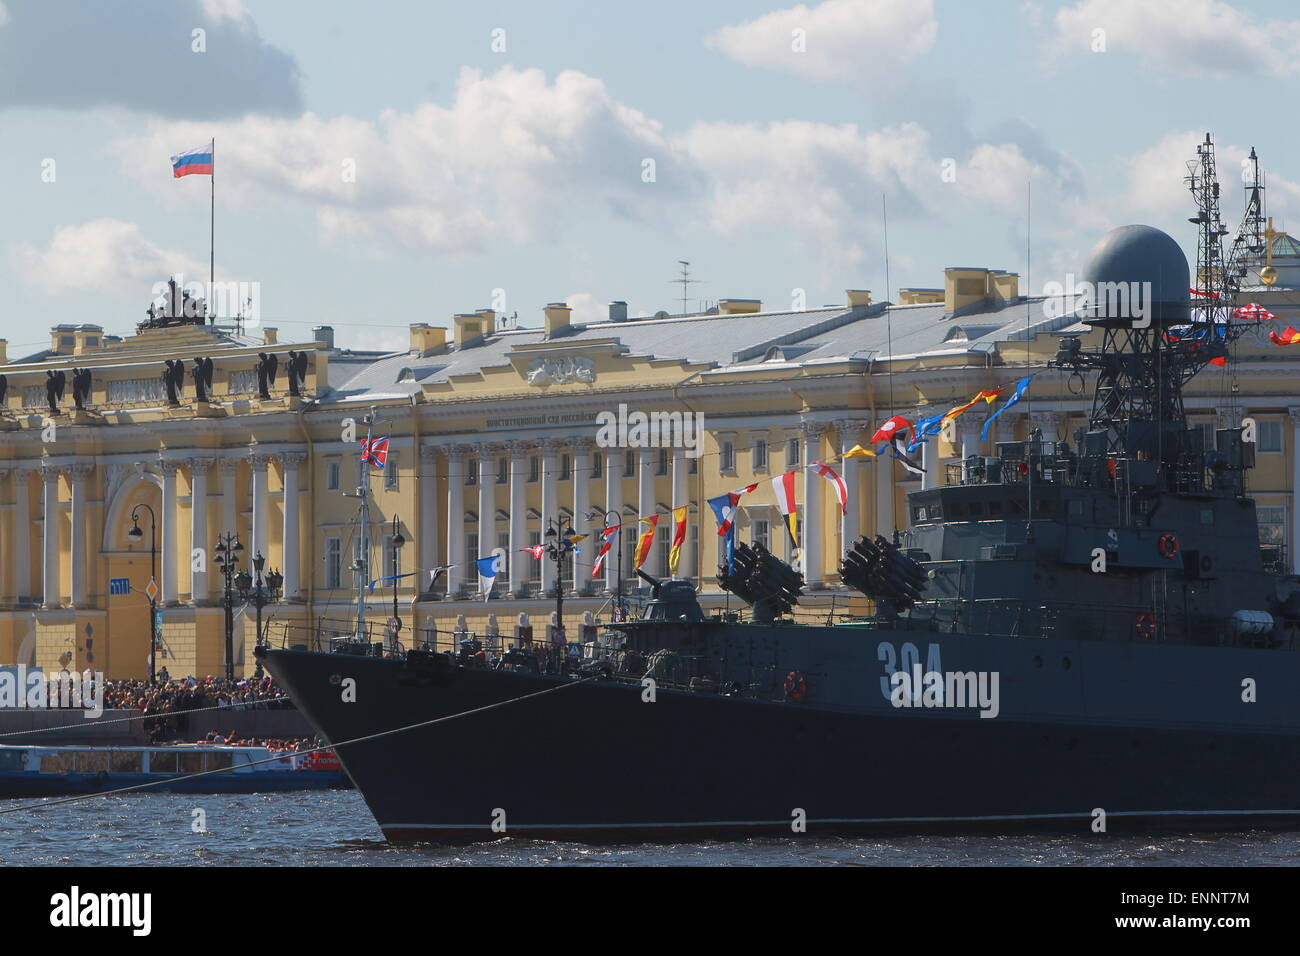 St. Petersburg, Russia. 9th May, 2015. A small anti-submarine vessel of the Baltic Fleet takes part in the military parade marking the 70th anniversary of the victory in the Great Patriotic War, on the Neva River in St. Petersburg, Russia, May 9, 2015. Credit:  Lu Jinbo/Xinhua/Alamy Live News Stock Photo